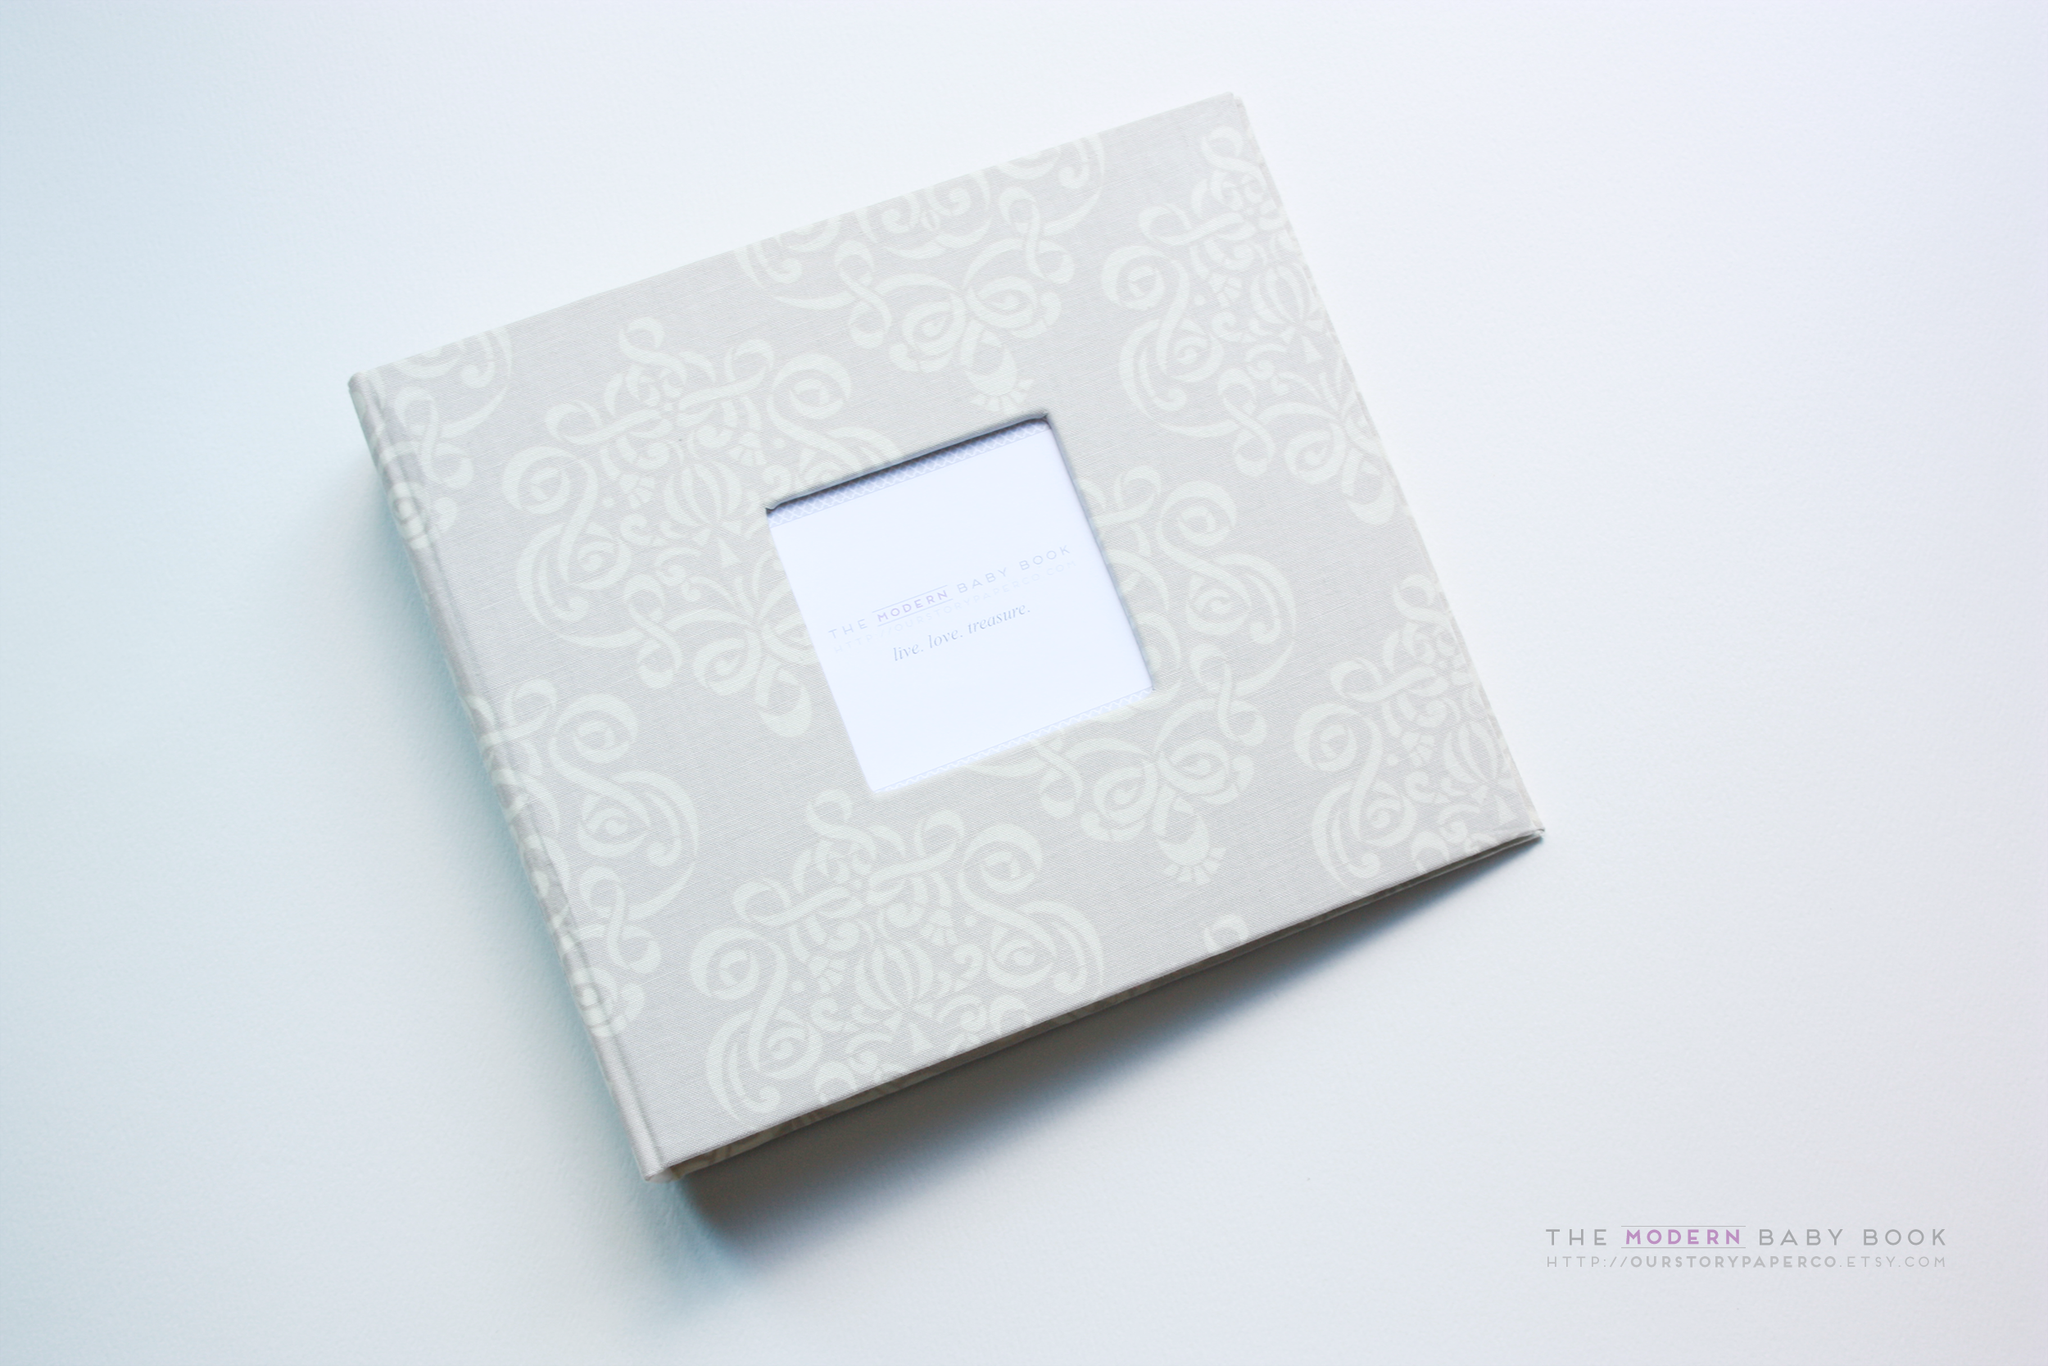 Natural Beige Swirls Modern Baby Book - Our Story Paper Co.